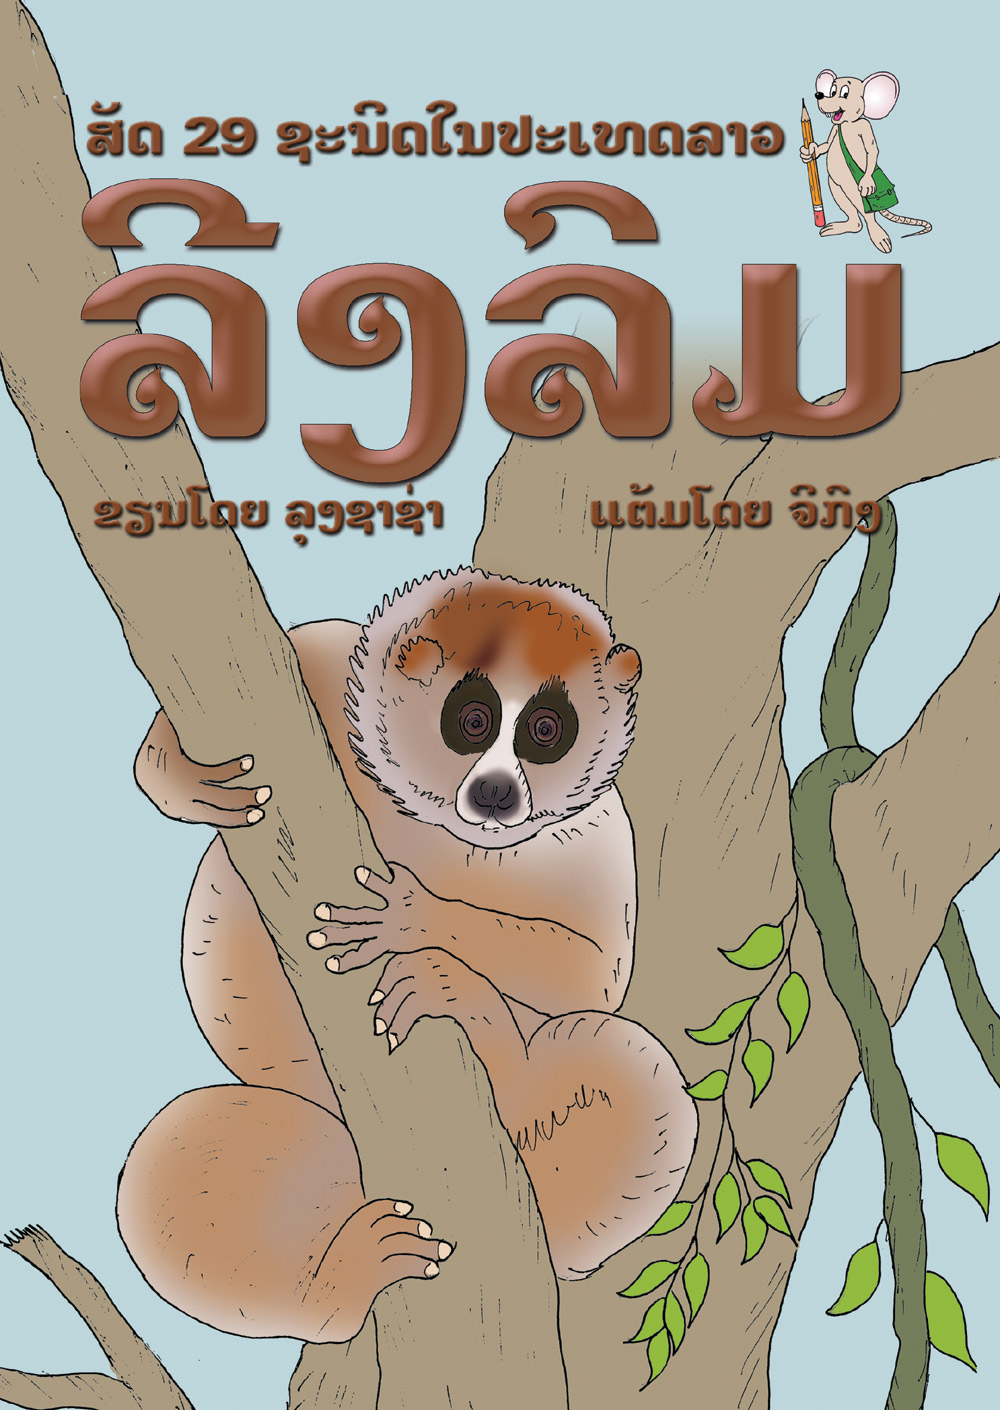 The Slow Loris large book cover, published in Lao language